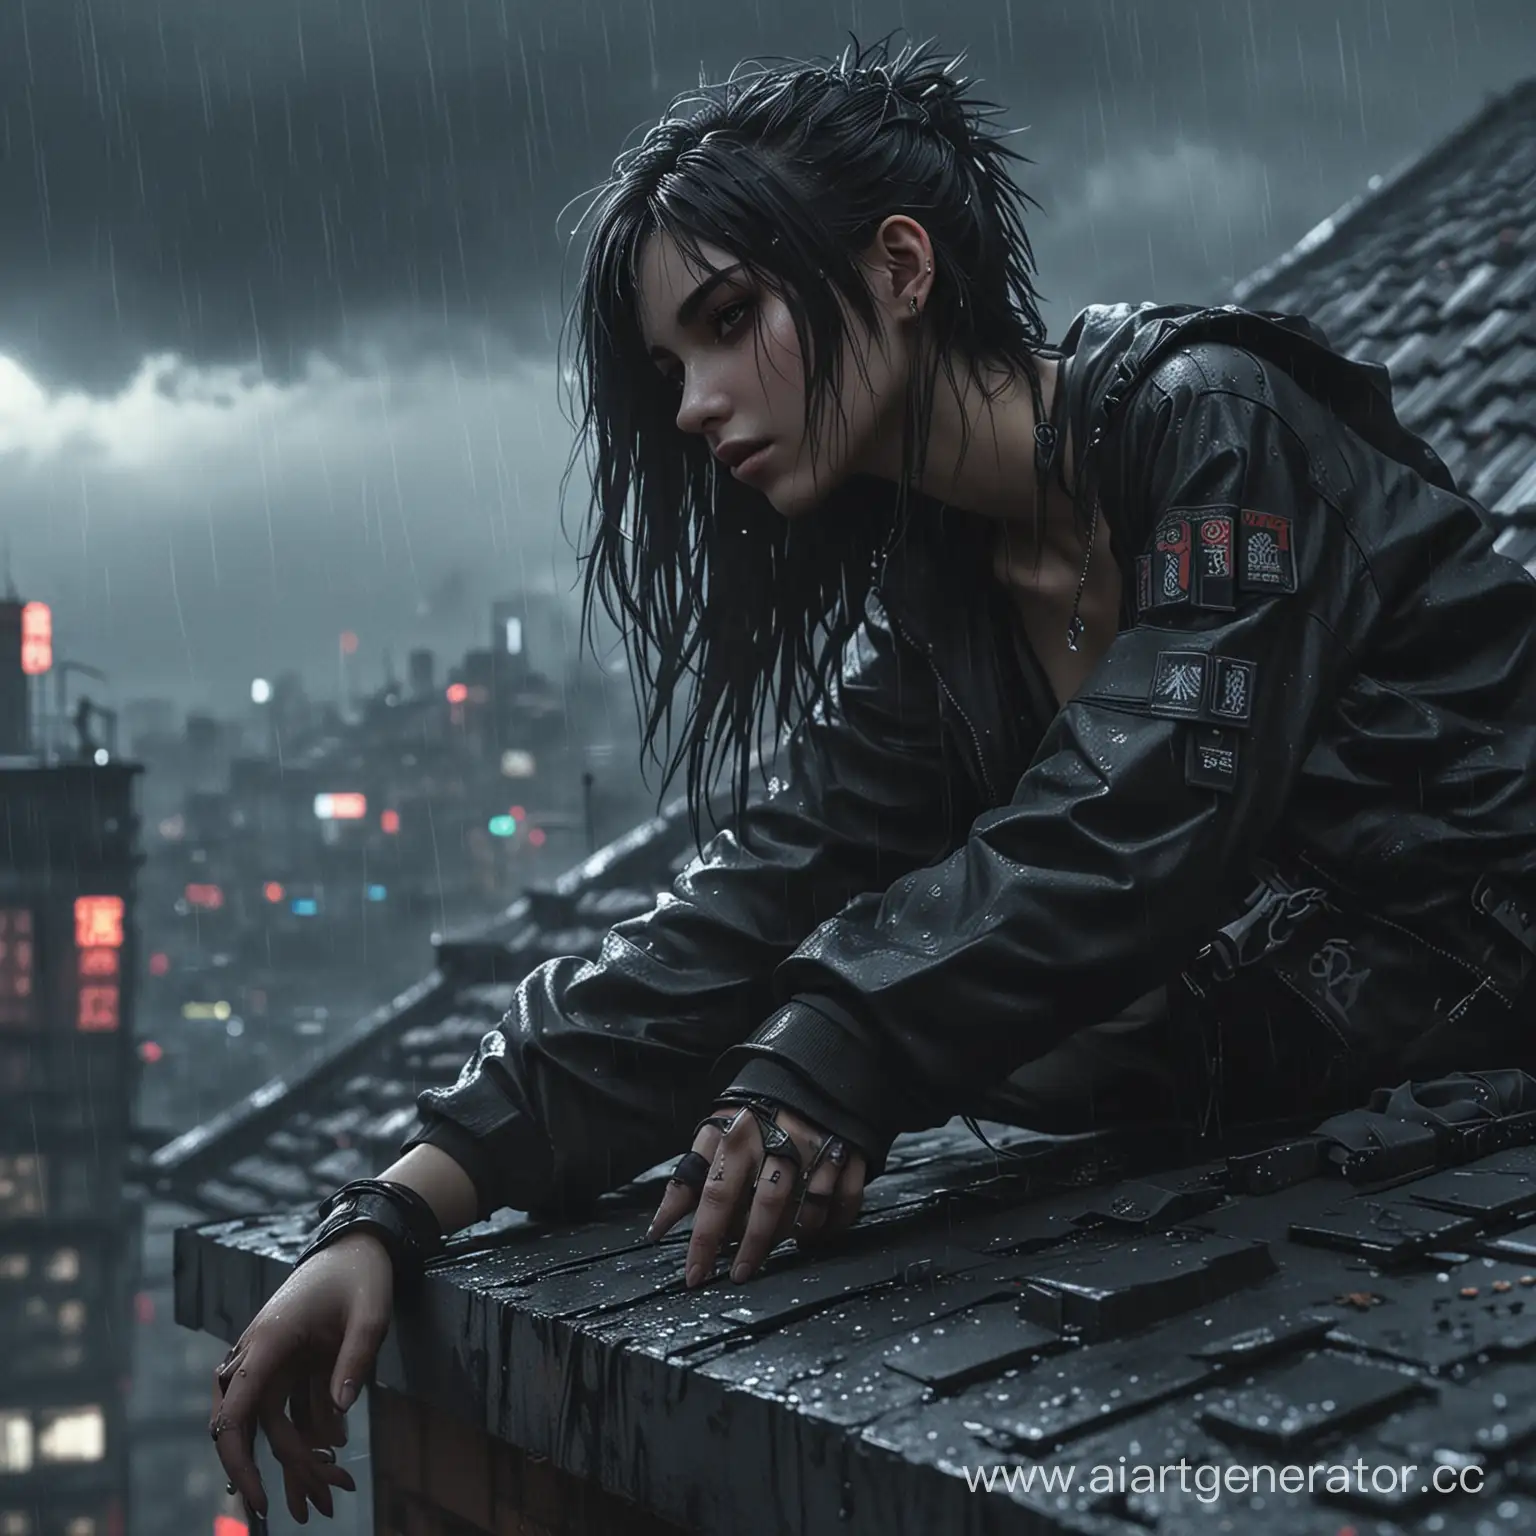 cyberpunk dark style, rain, fog, anime emo girl with detail hair, the girl is lying on the edge of roof, detail light and shadows.